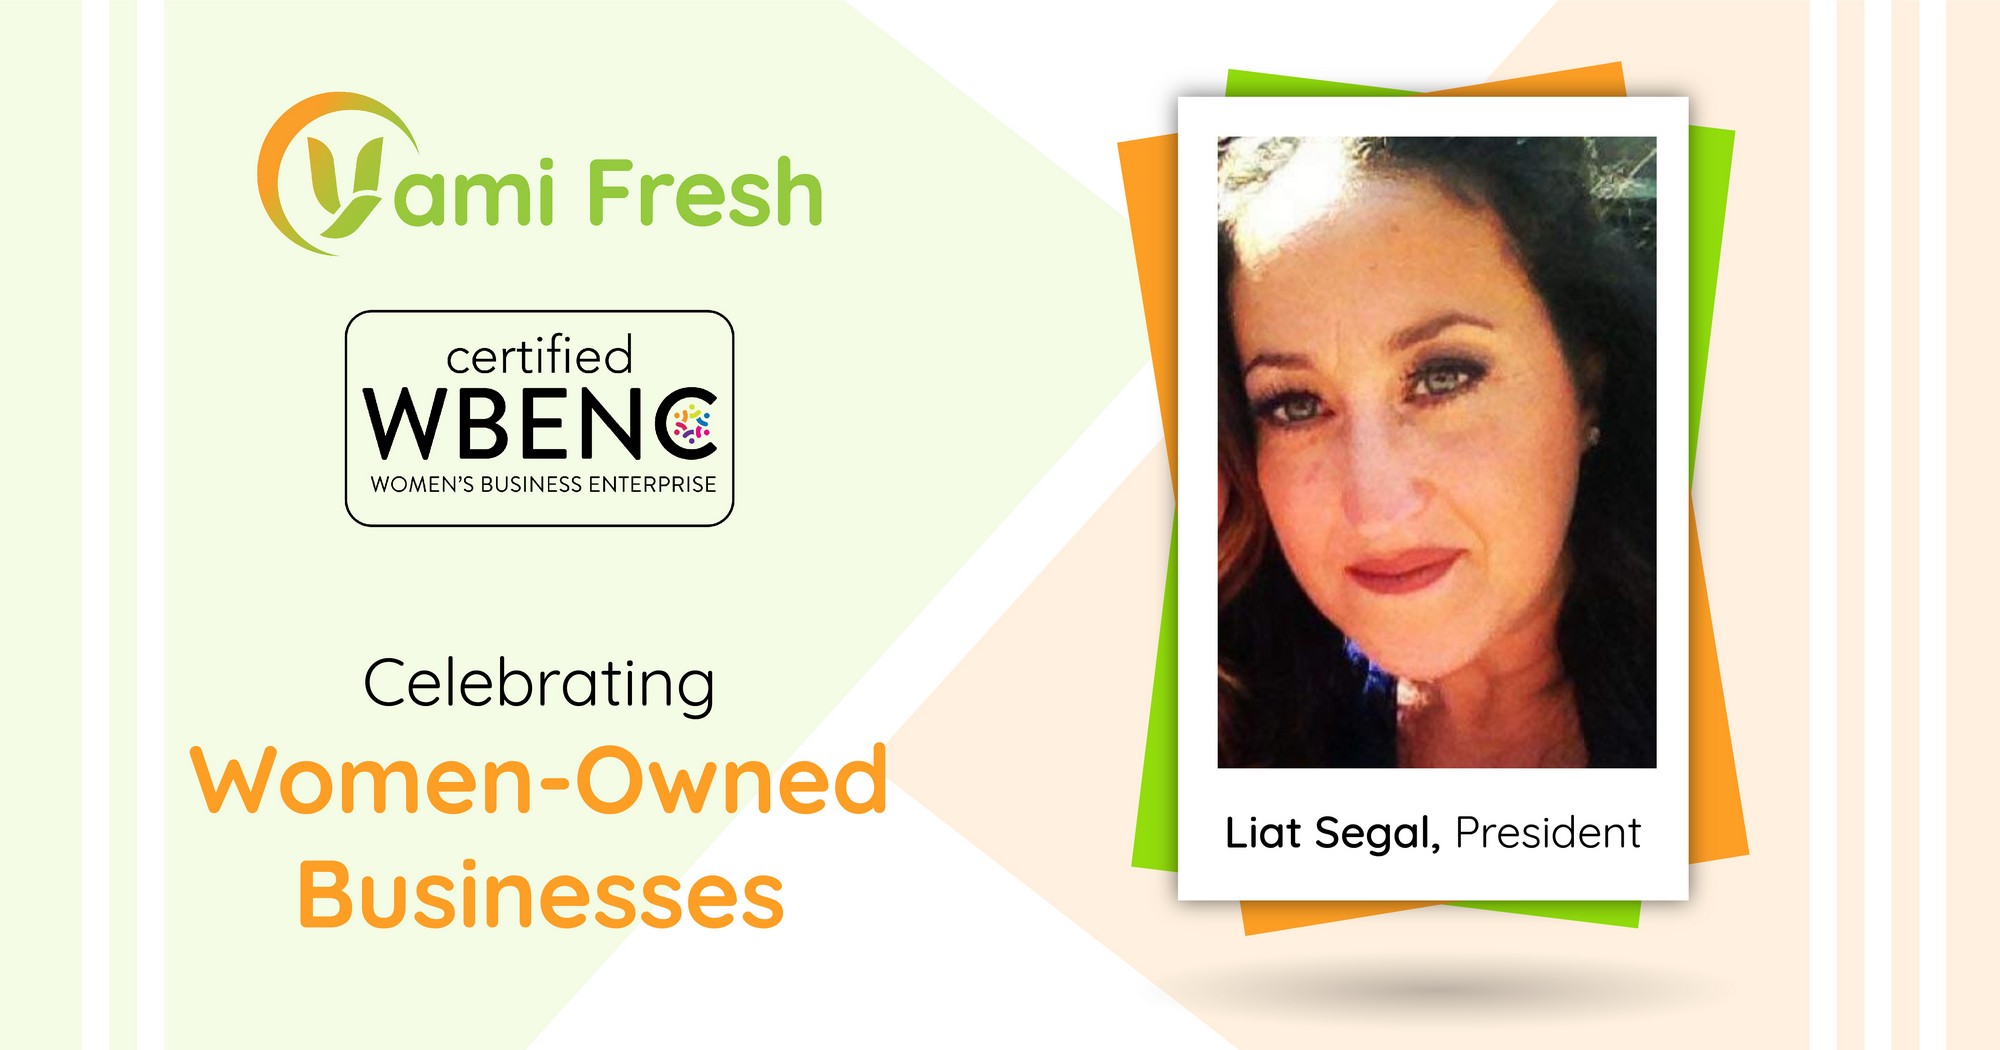 Certified Woman Owned Business | Yami Fresh | Chicago Break Room Solutions